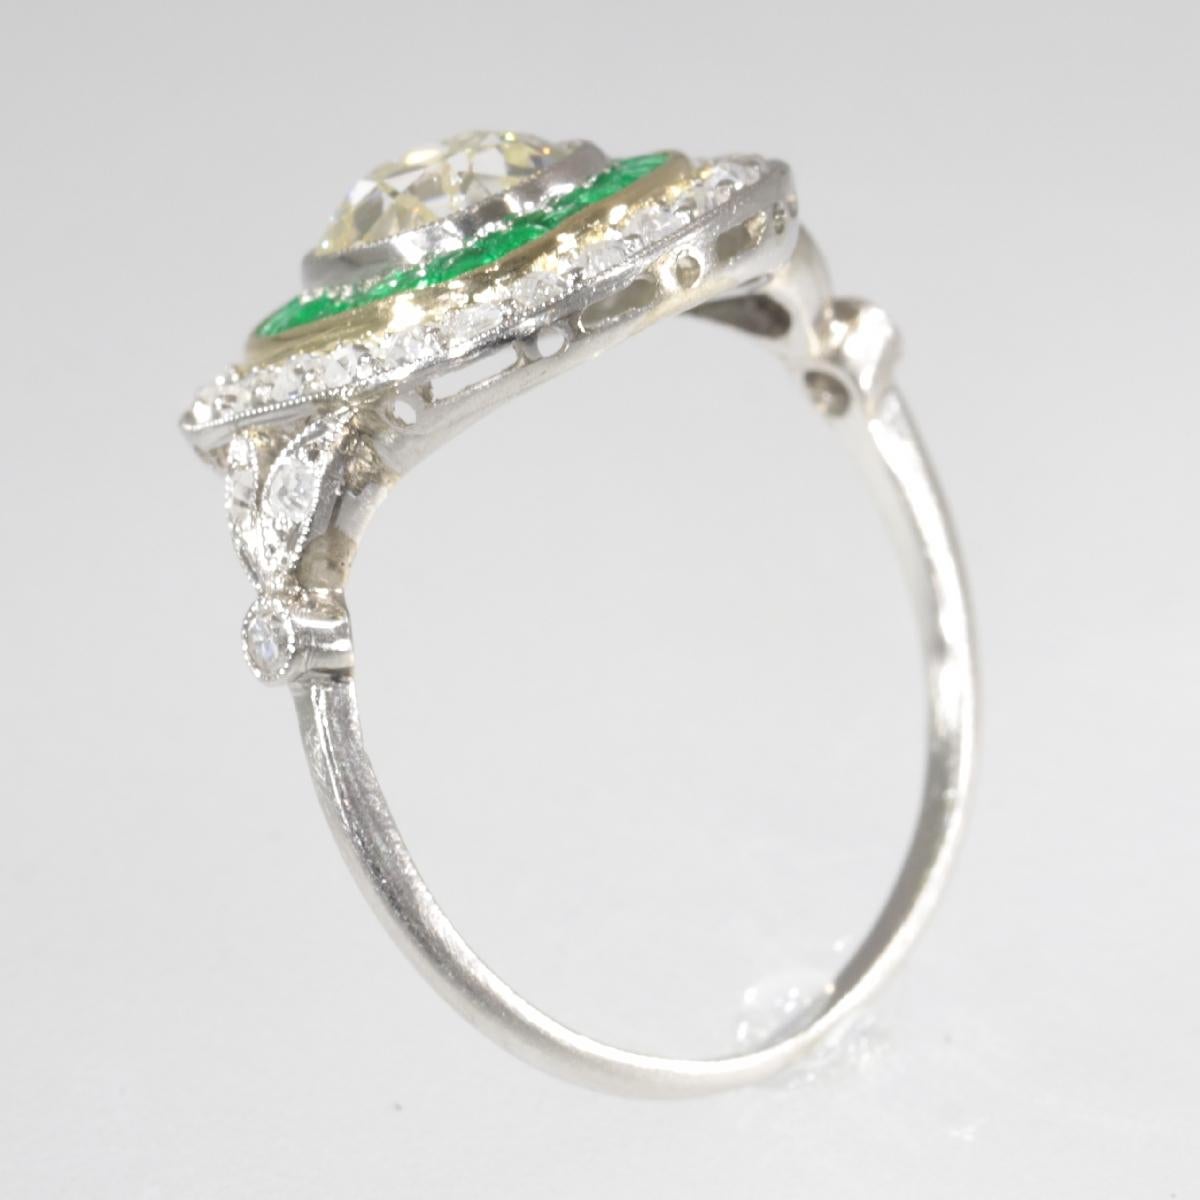 Stunning Vintage Art Deco Style Large Diamond and Emerald Engagement Ring, 1930s For Sale 1